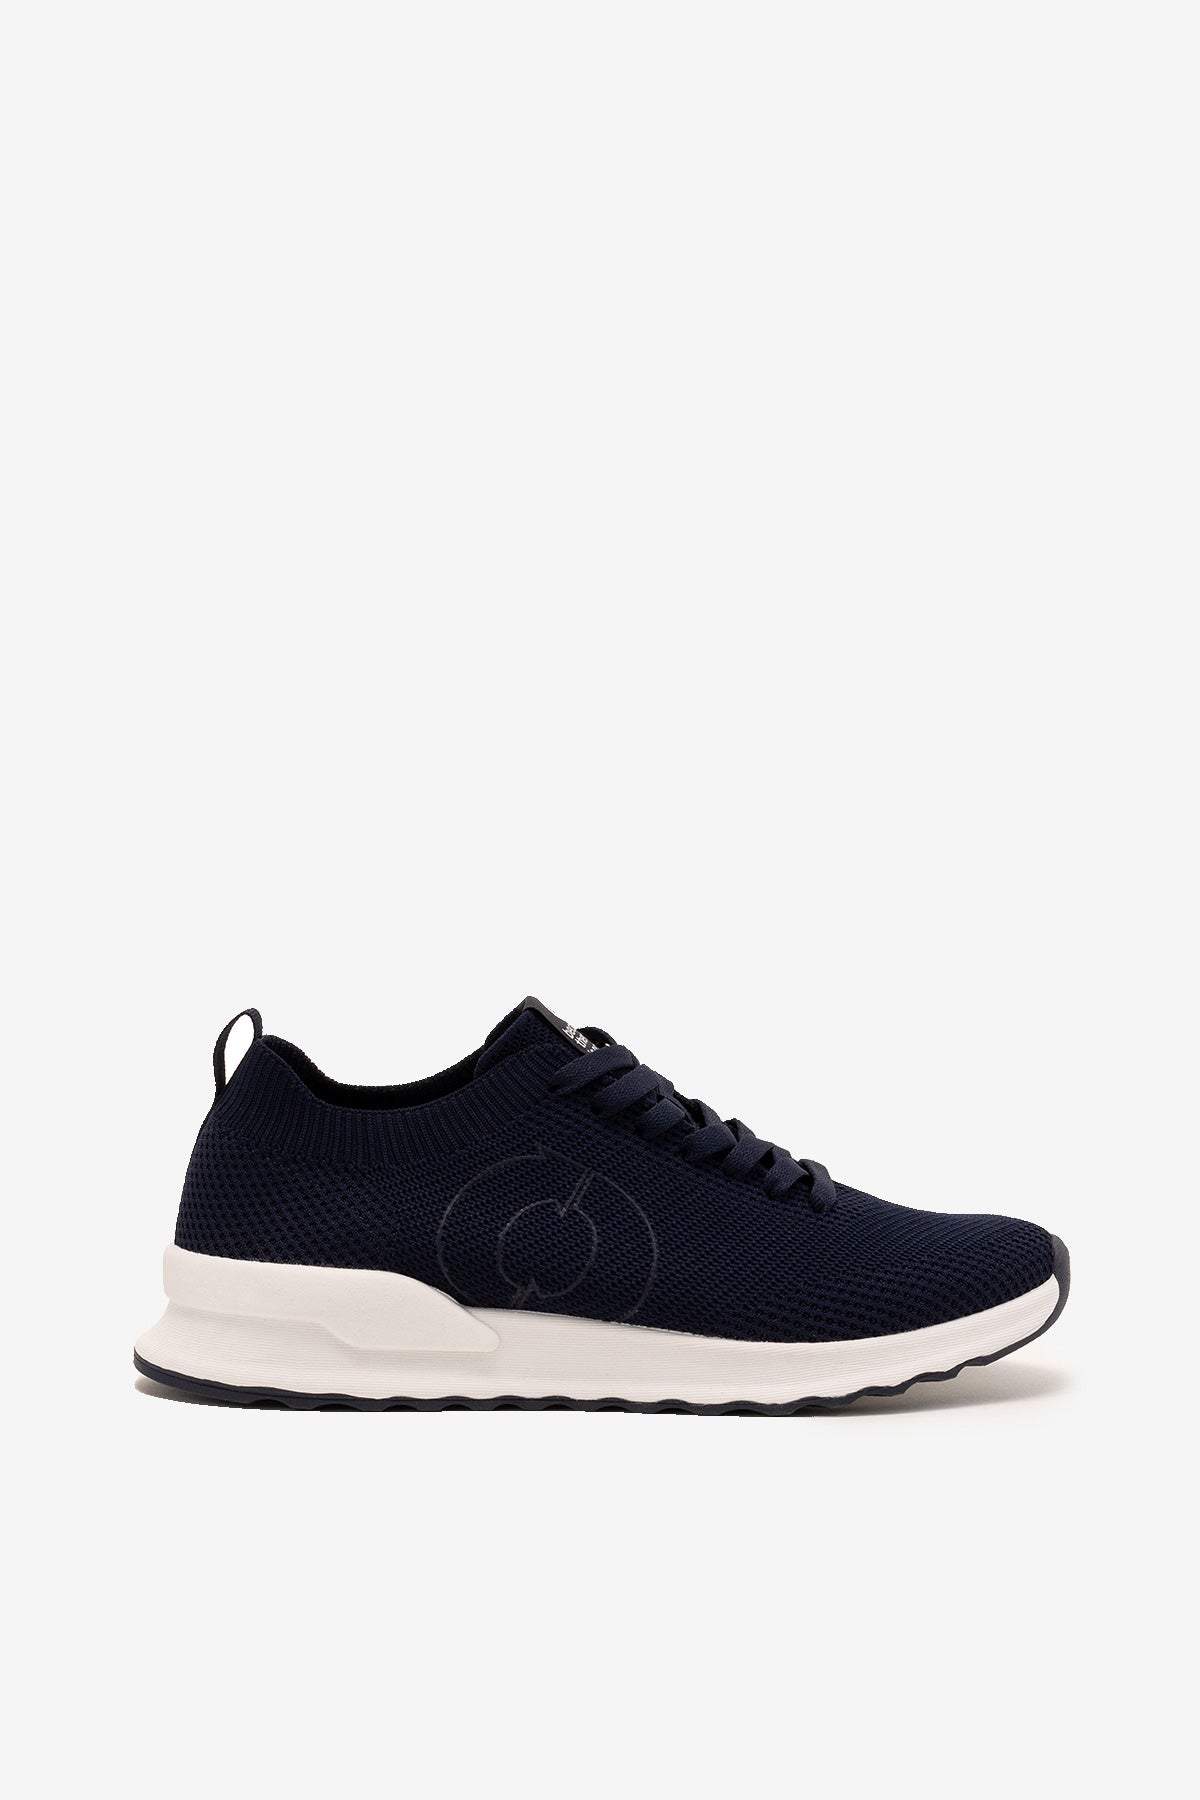 NAVY BLUE CONDE KNITTED TRAINERS